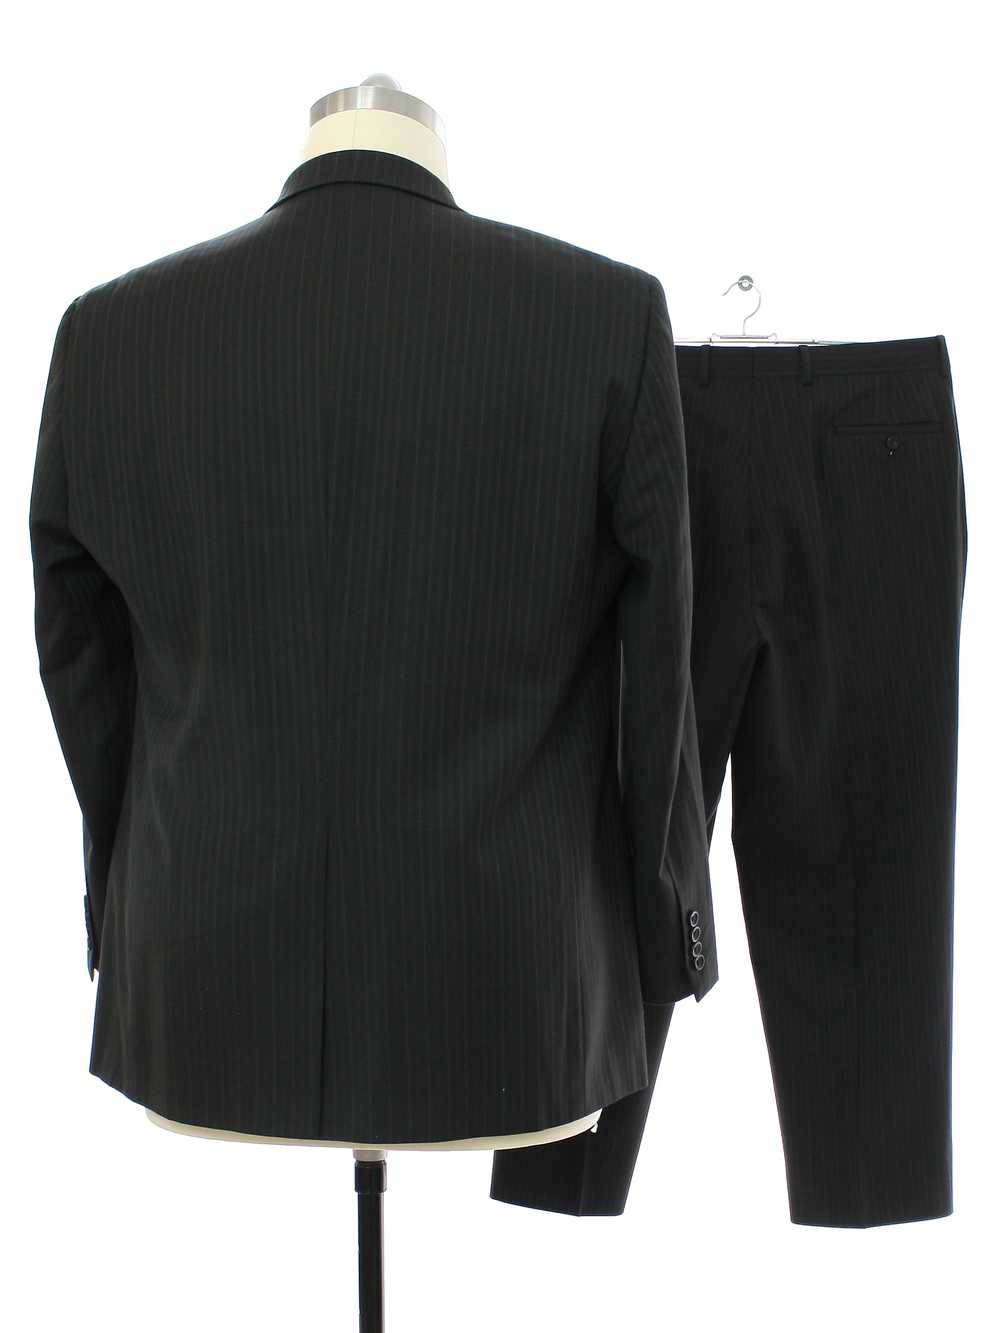 1990's Joseph and Feiss Mens Pinstriped Wool Suit - image 3